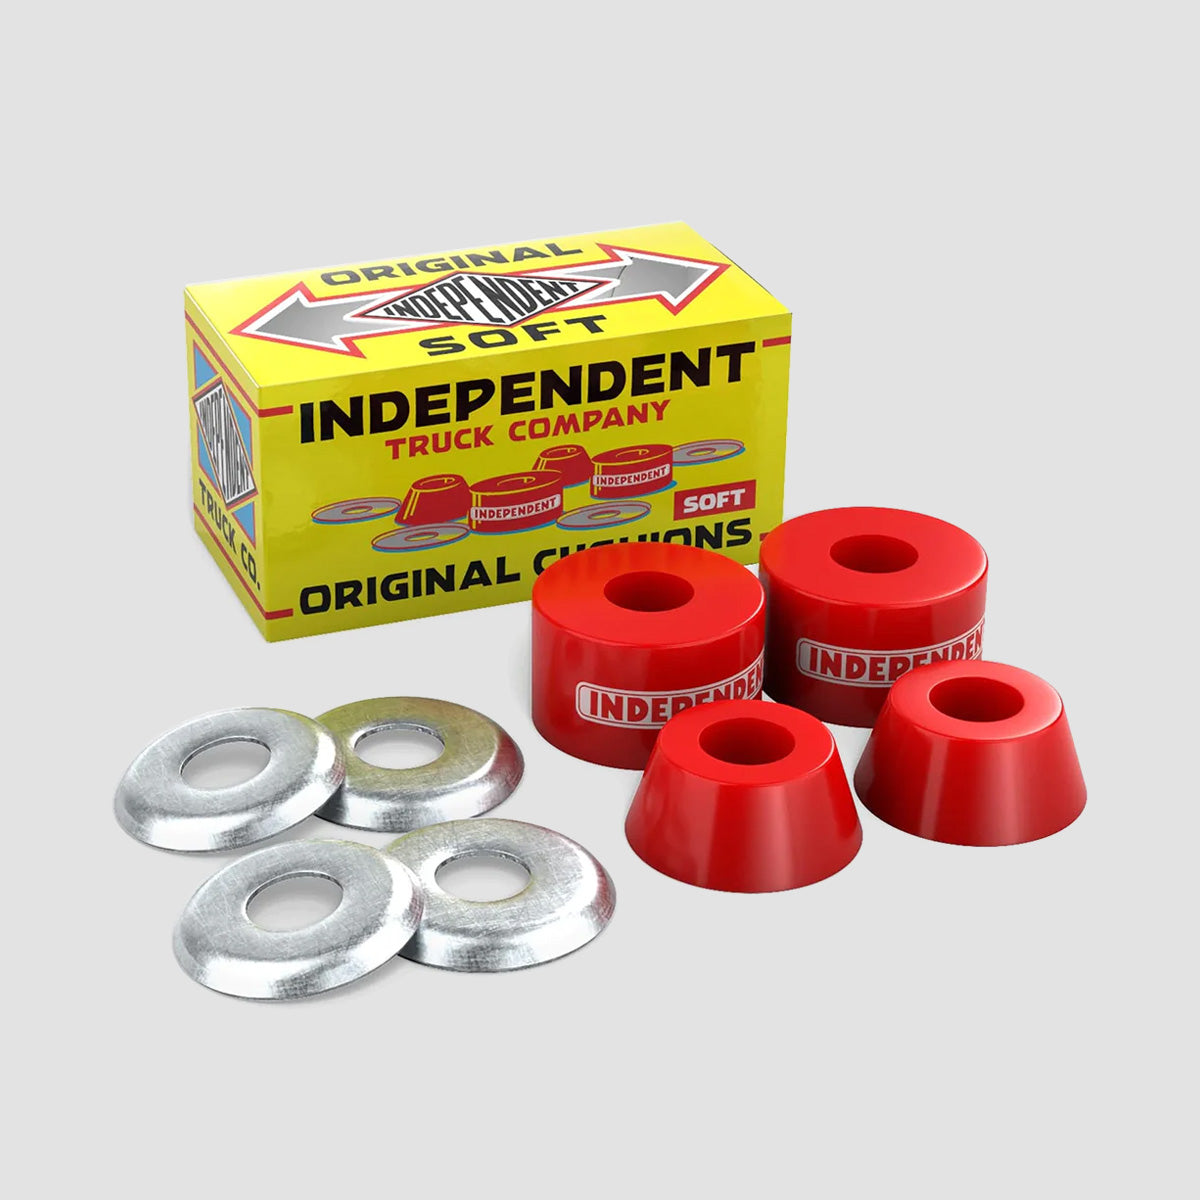 Independent Genuine Parts 90a Soft Original Bushings Red